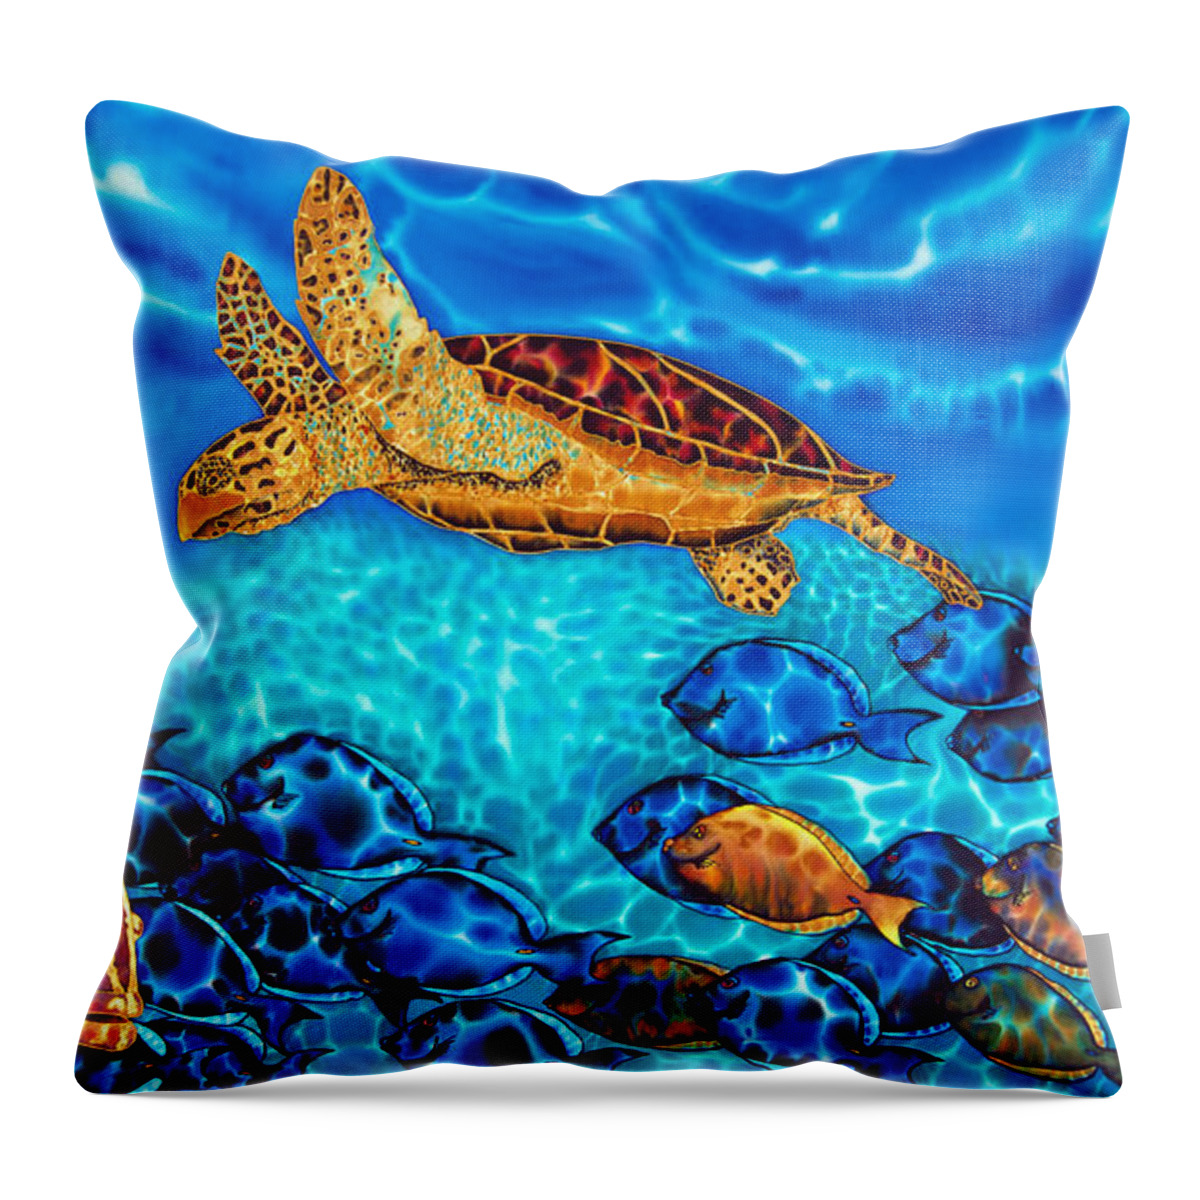 Turtle Throw Pillow featuring the painting Caribbean Sea Turtle and Reef Fish by Daniel Jean-Baptiste